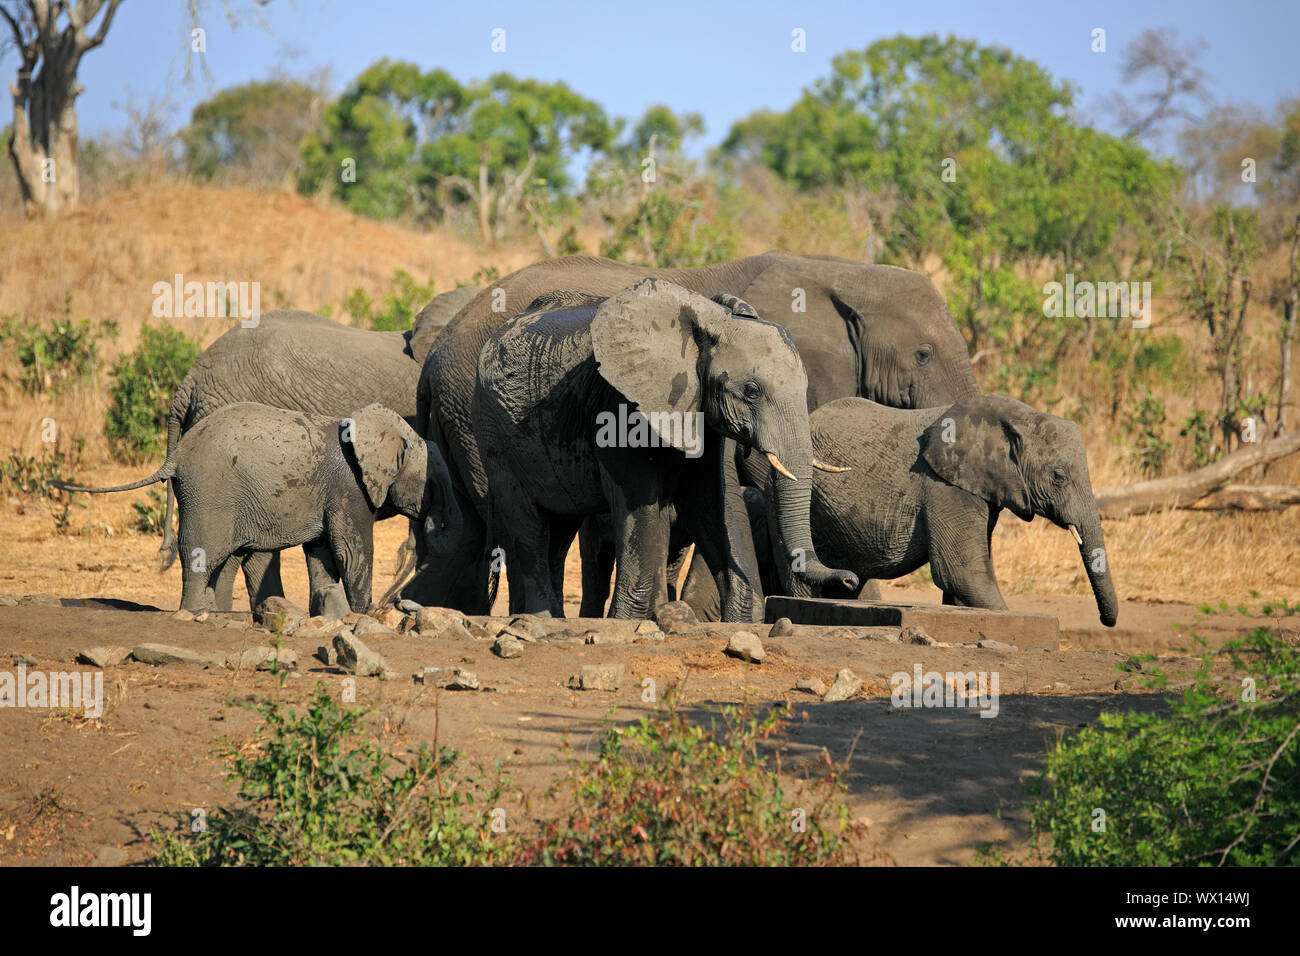 A Herd of elephants drinking at the waterhole Stock Photo